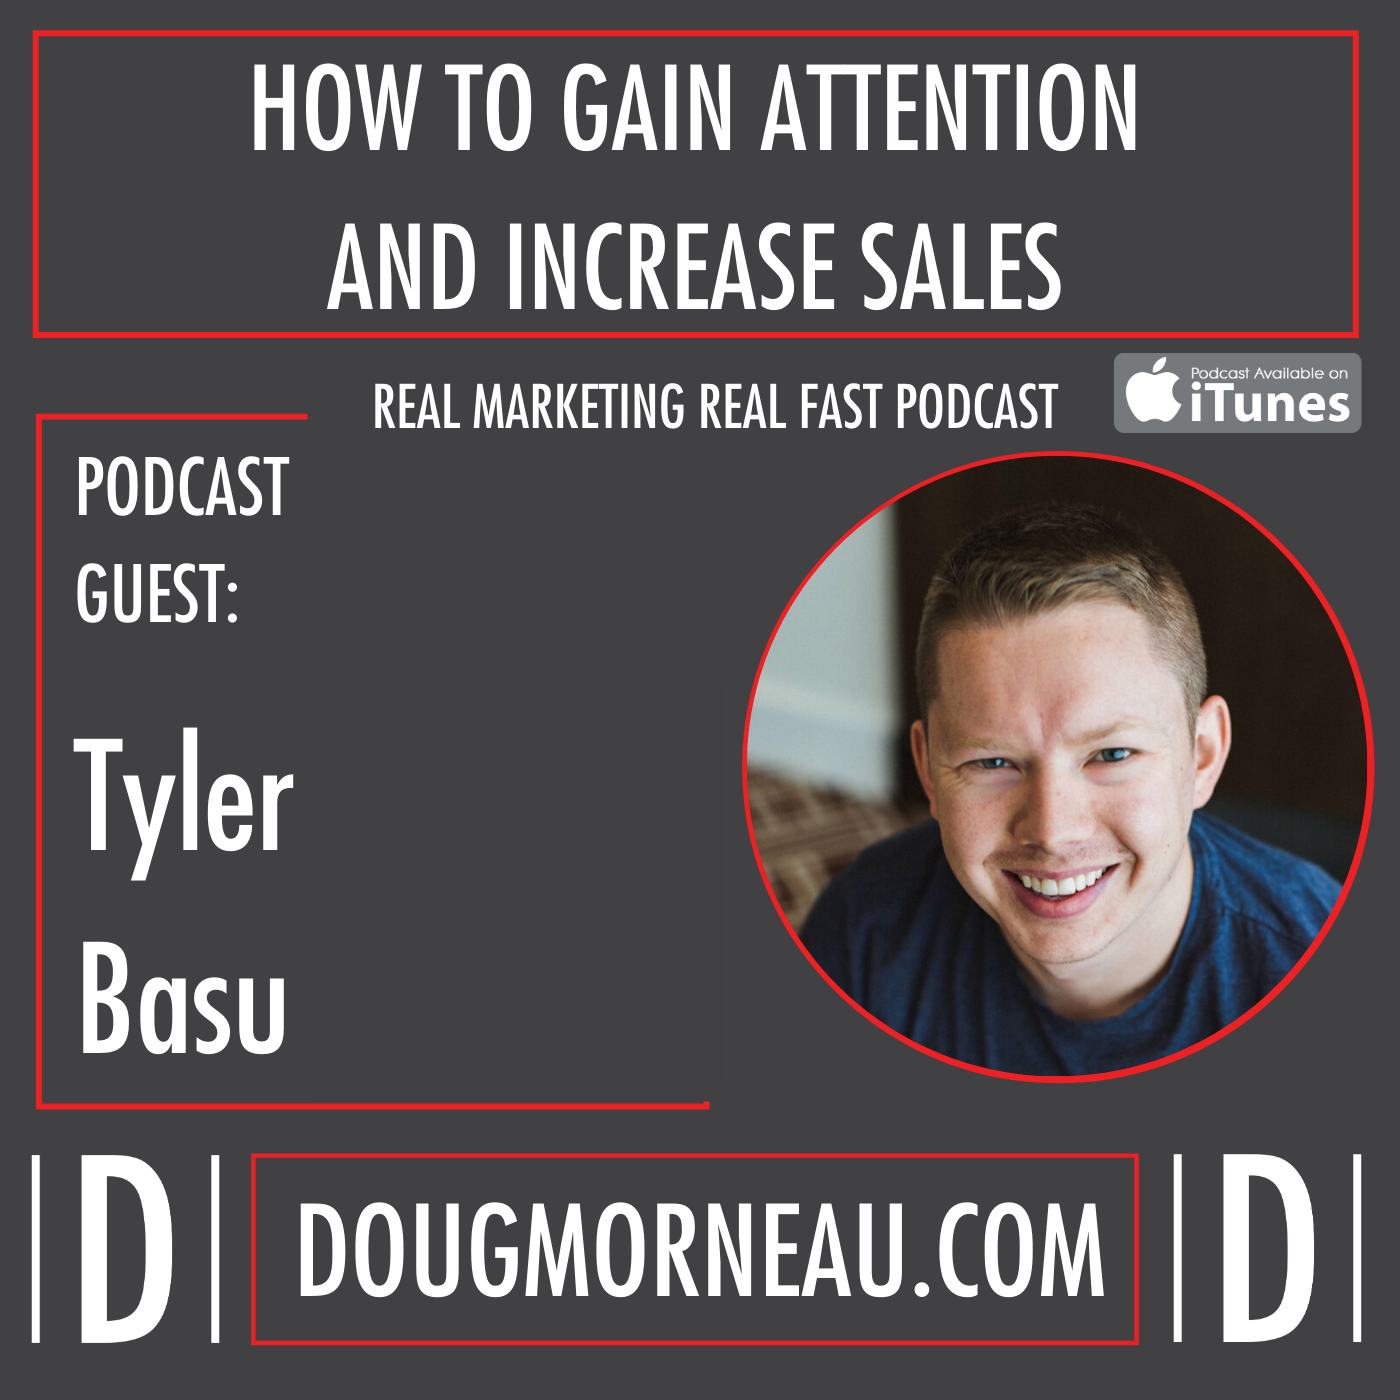 TYLER BASU HOW TO GAIN ATTENTION AND INCREASE SALES - DOUG MORNEAU - REAL MARKETING REAL FAST PODCAST